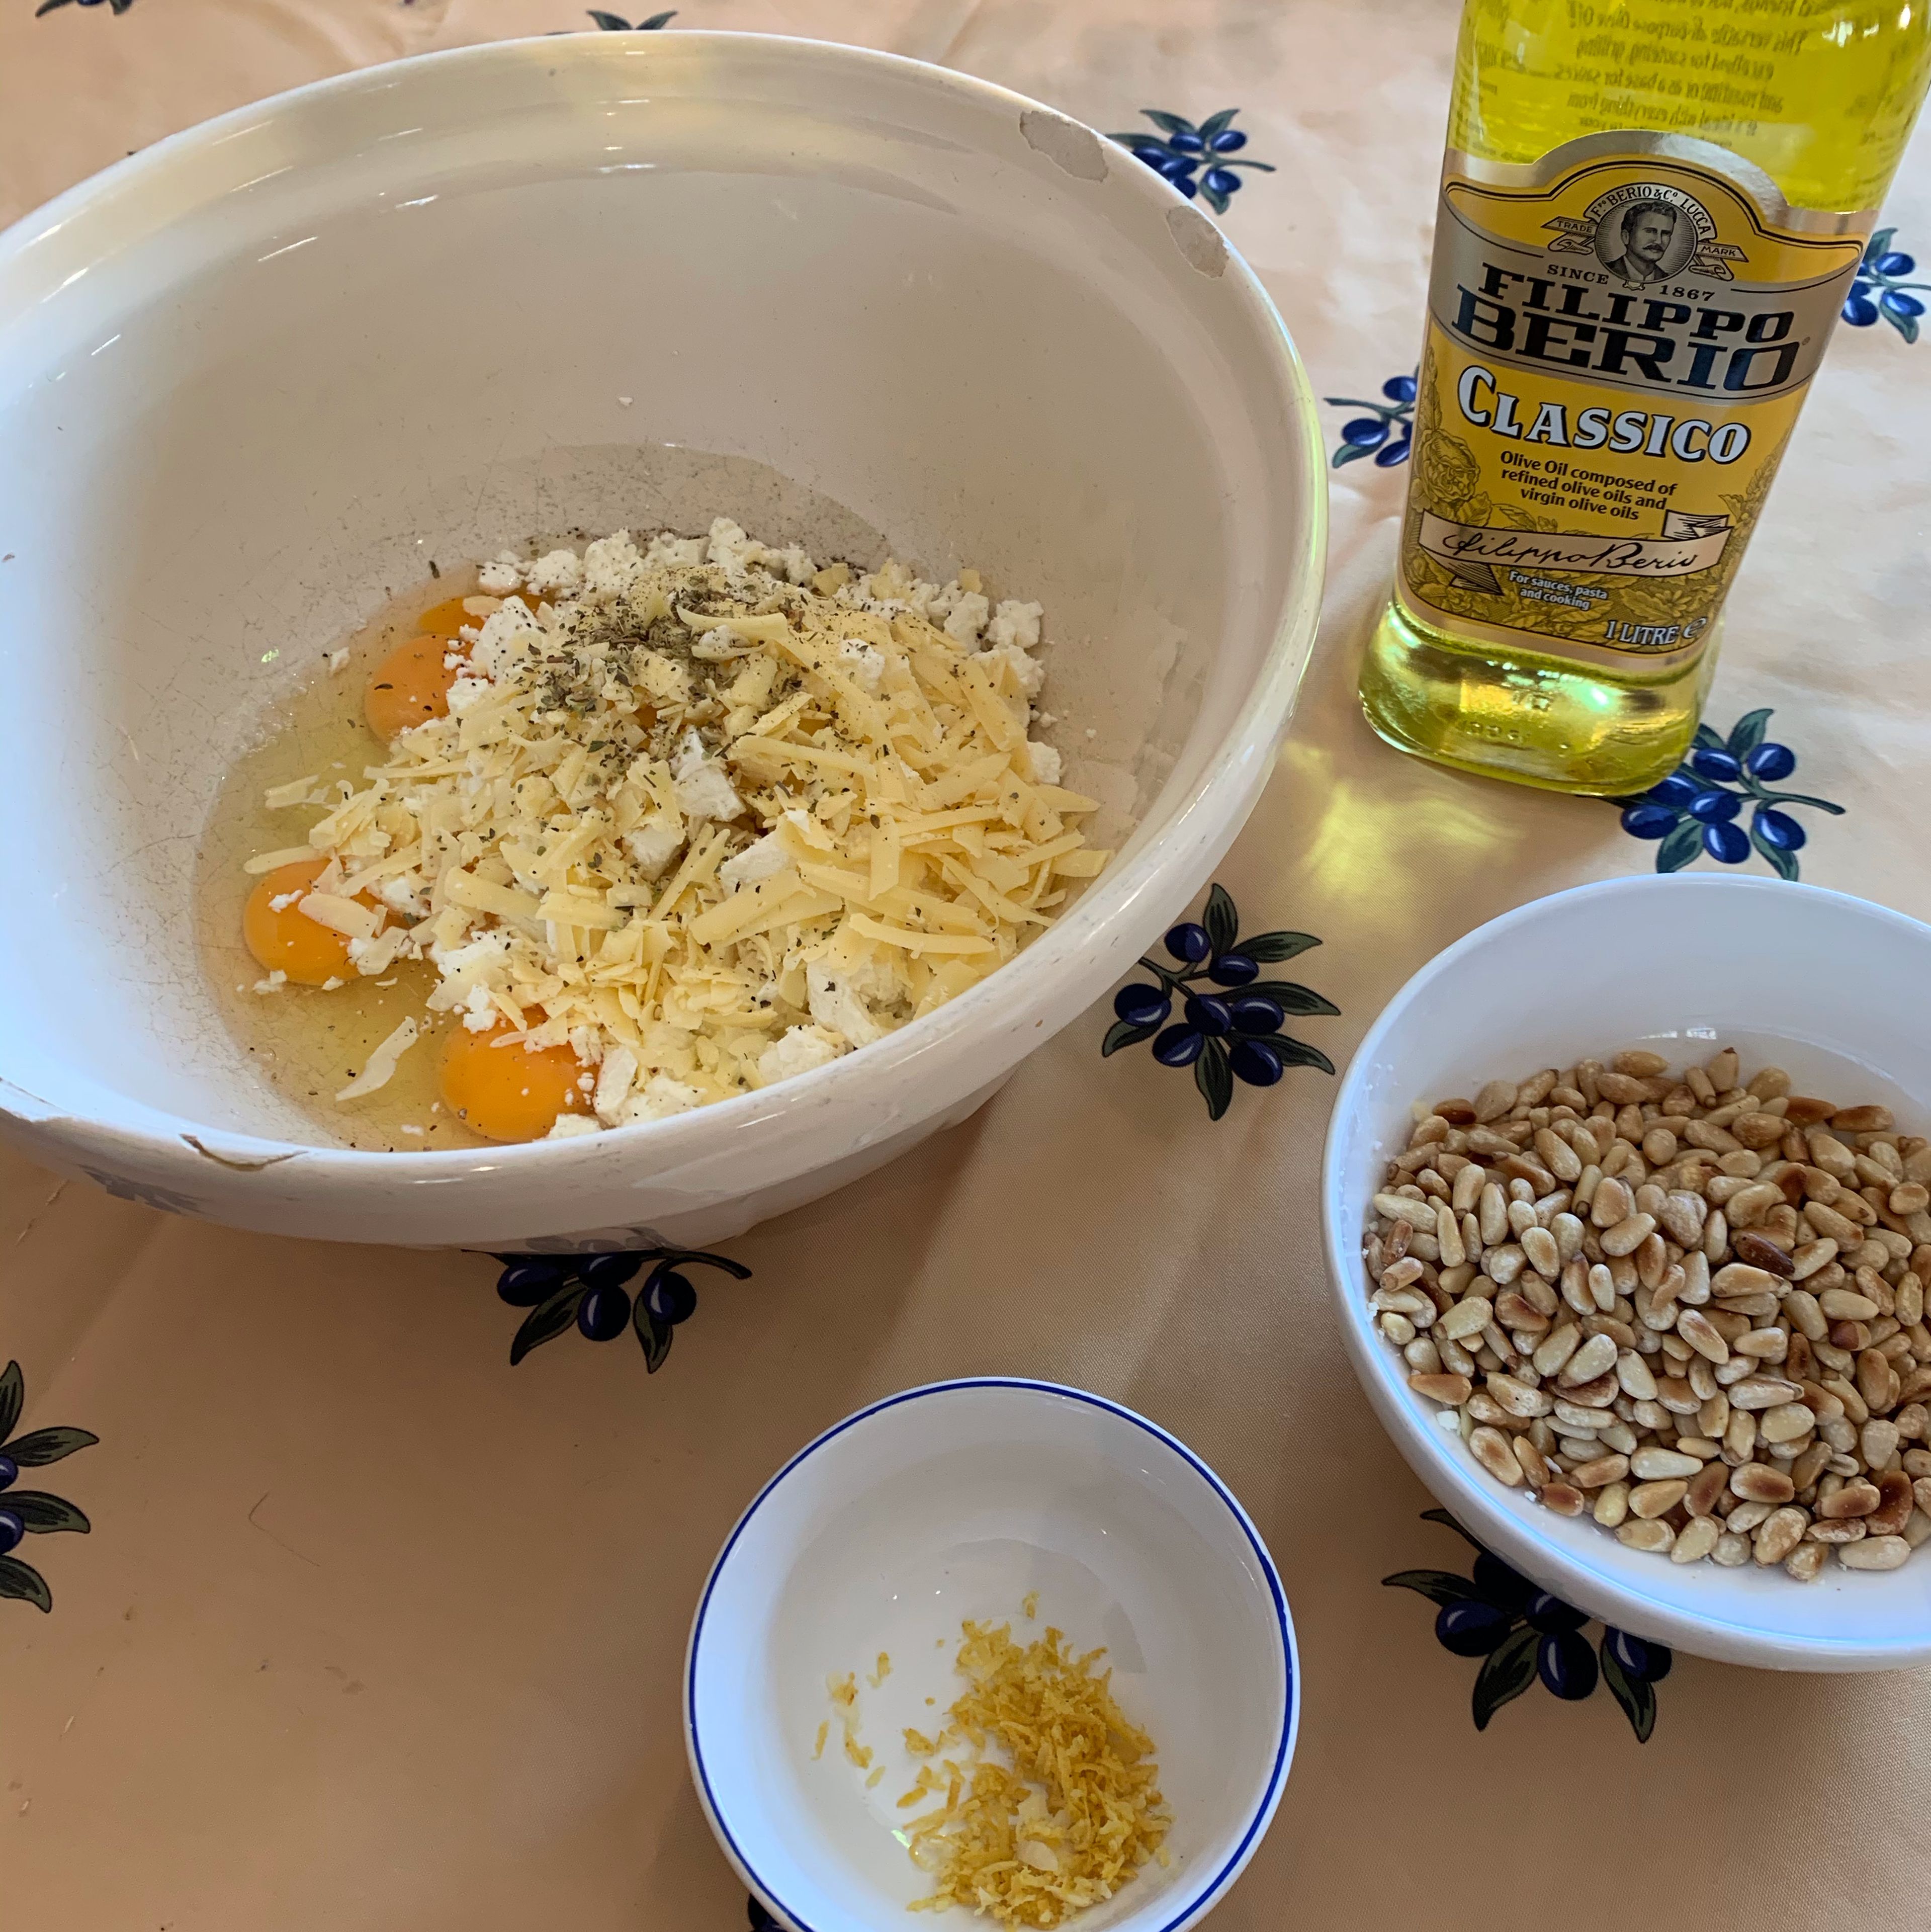 Zest 1 lemon and add it to the mixing bowl with the toasted pine nuts and a drizzle of olive oil